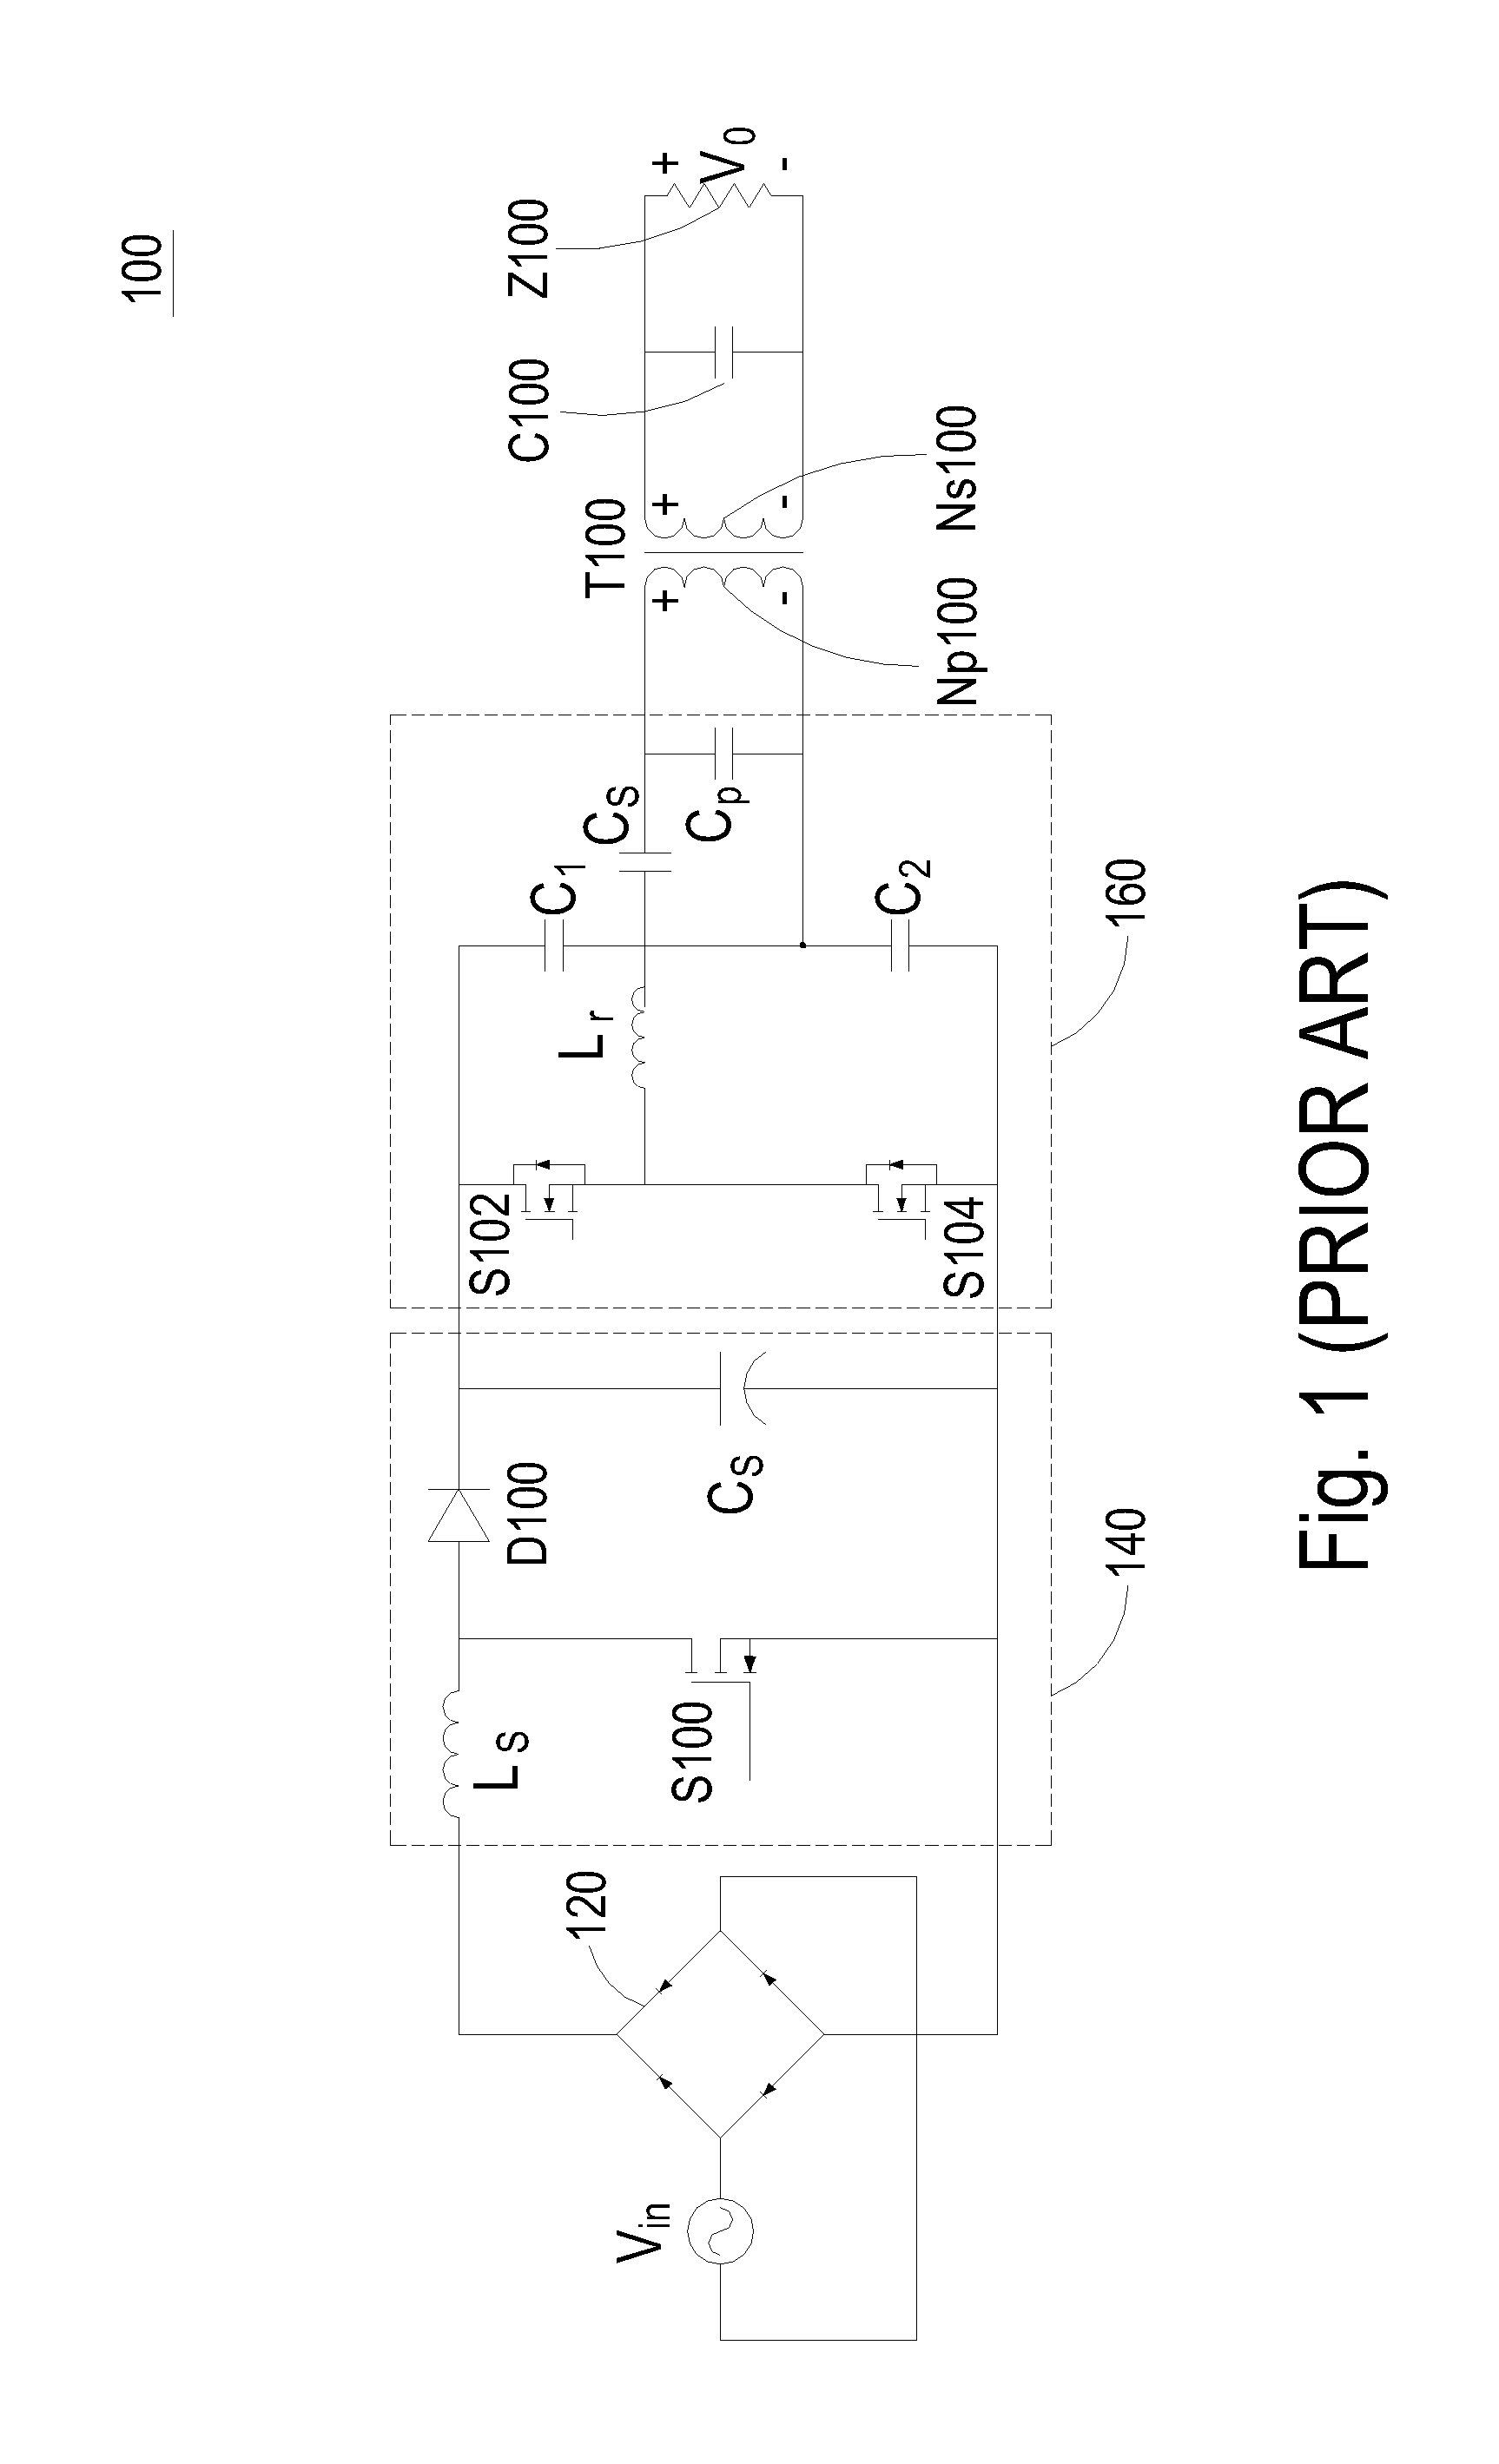 Power supply with single stage converter for performing power factor correction and resonant conversion